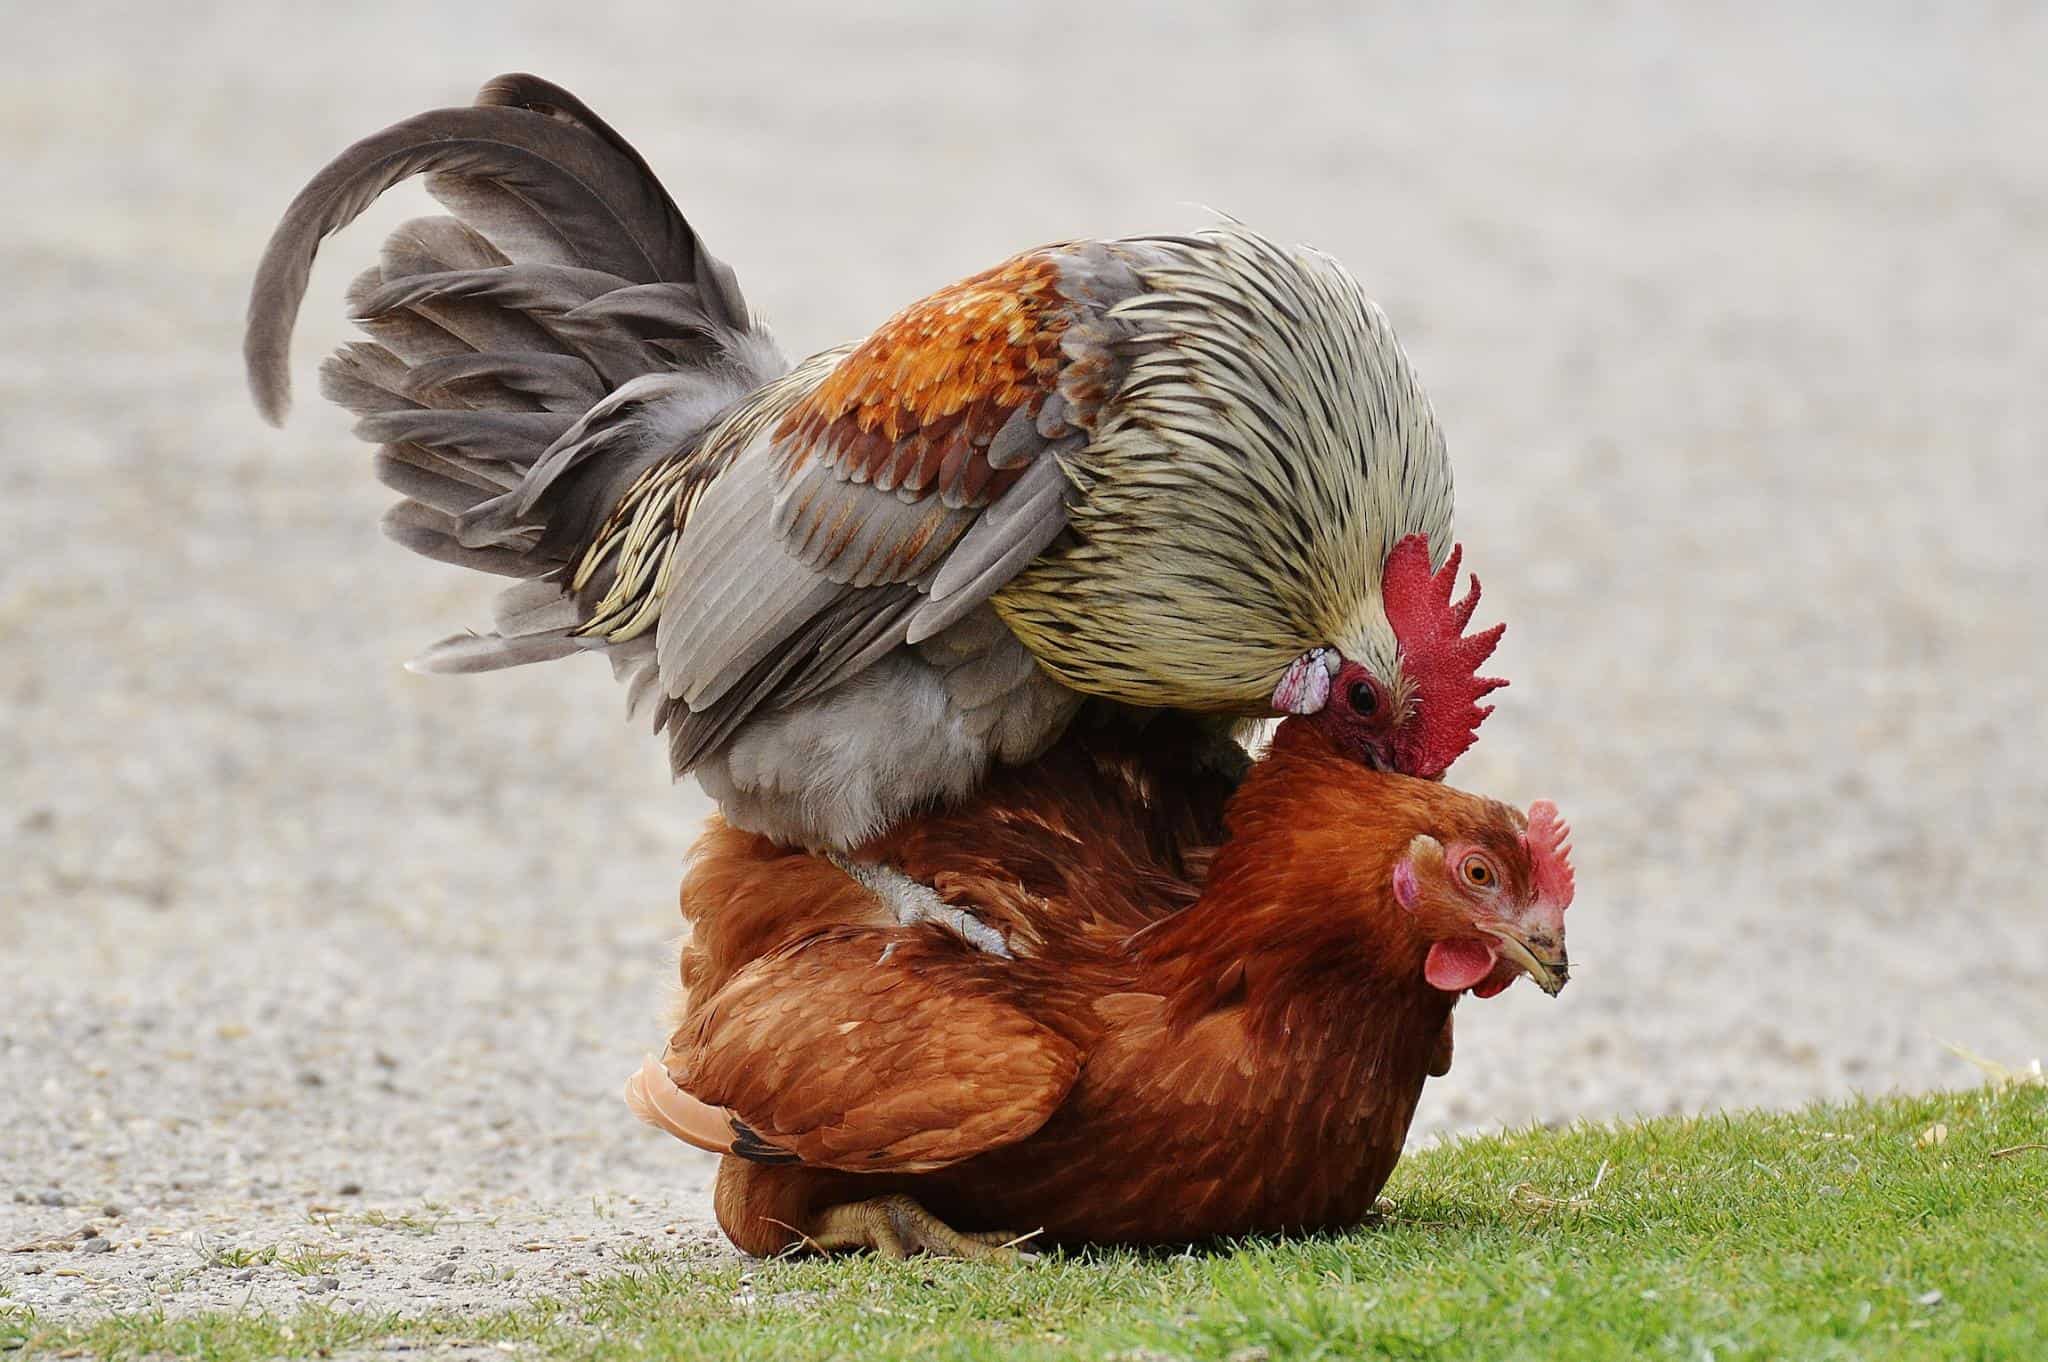 How To Stop a Rooster Crowing